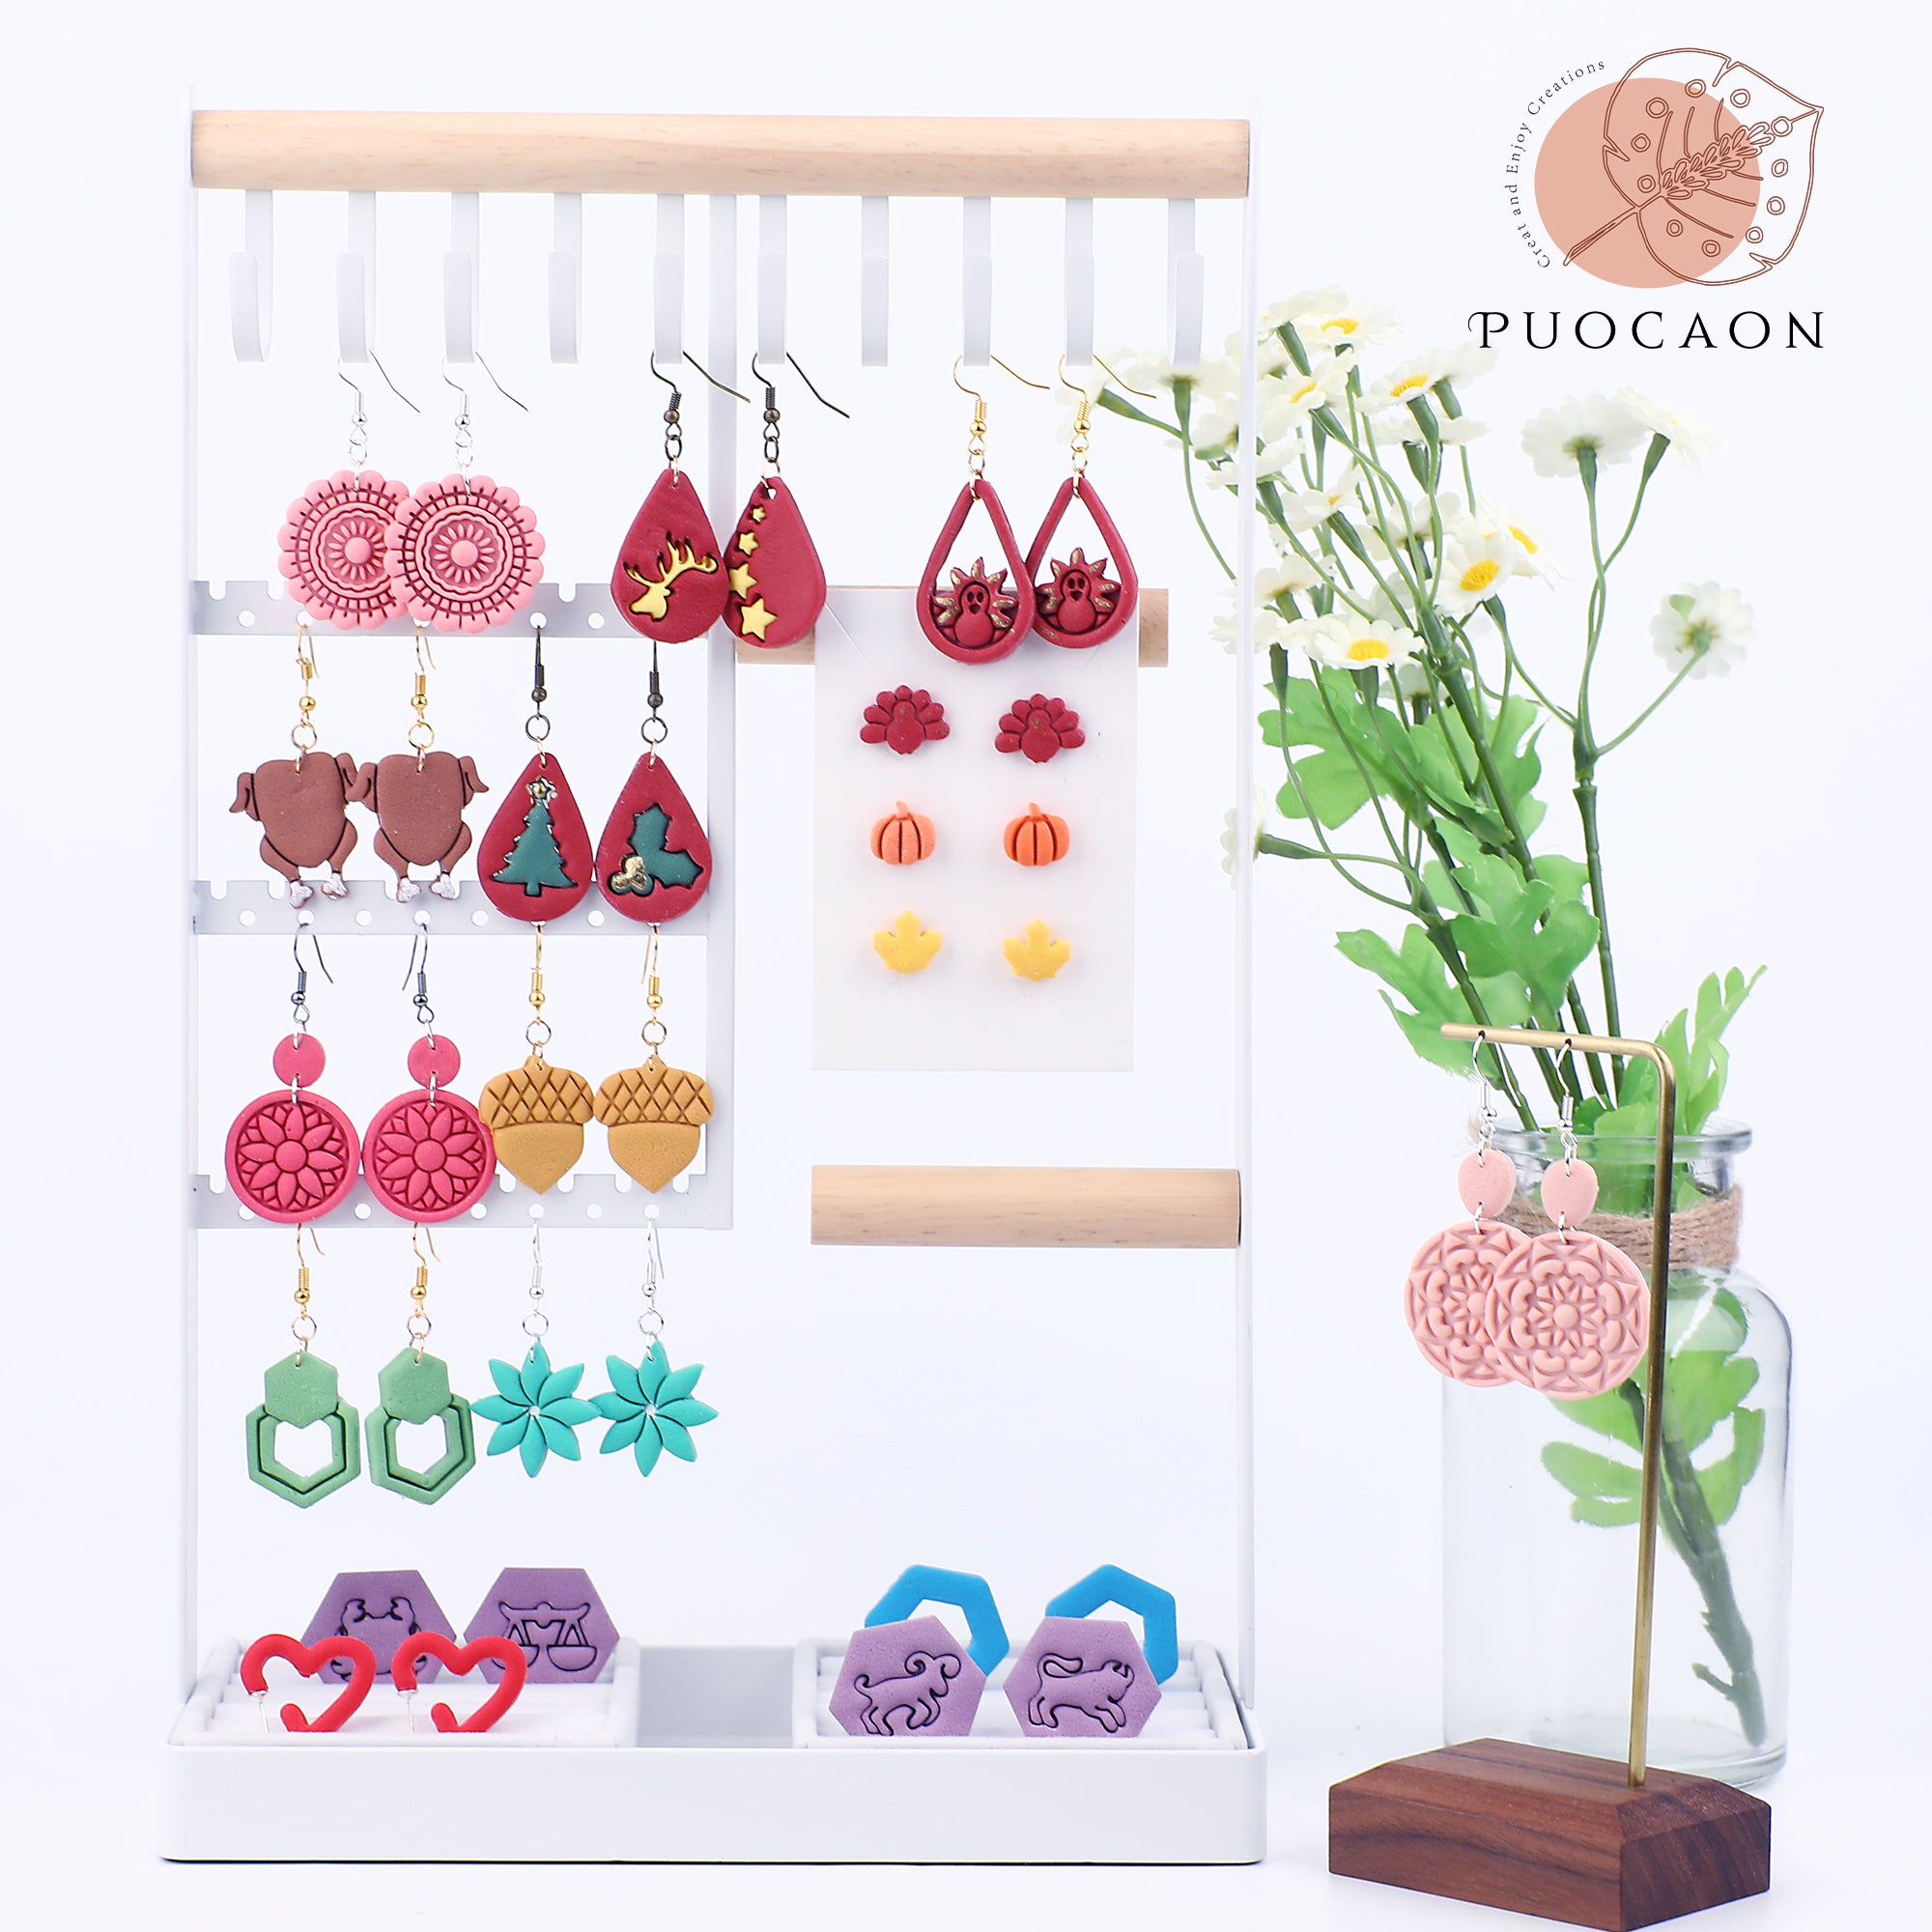 Puocaon Classic Polymer Clay Cutters 10 Pcs